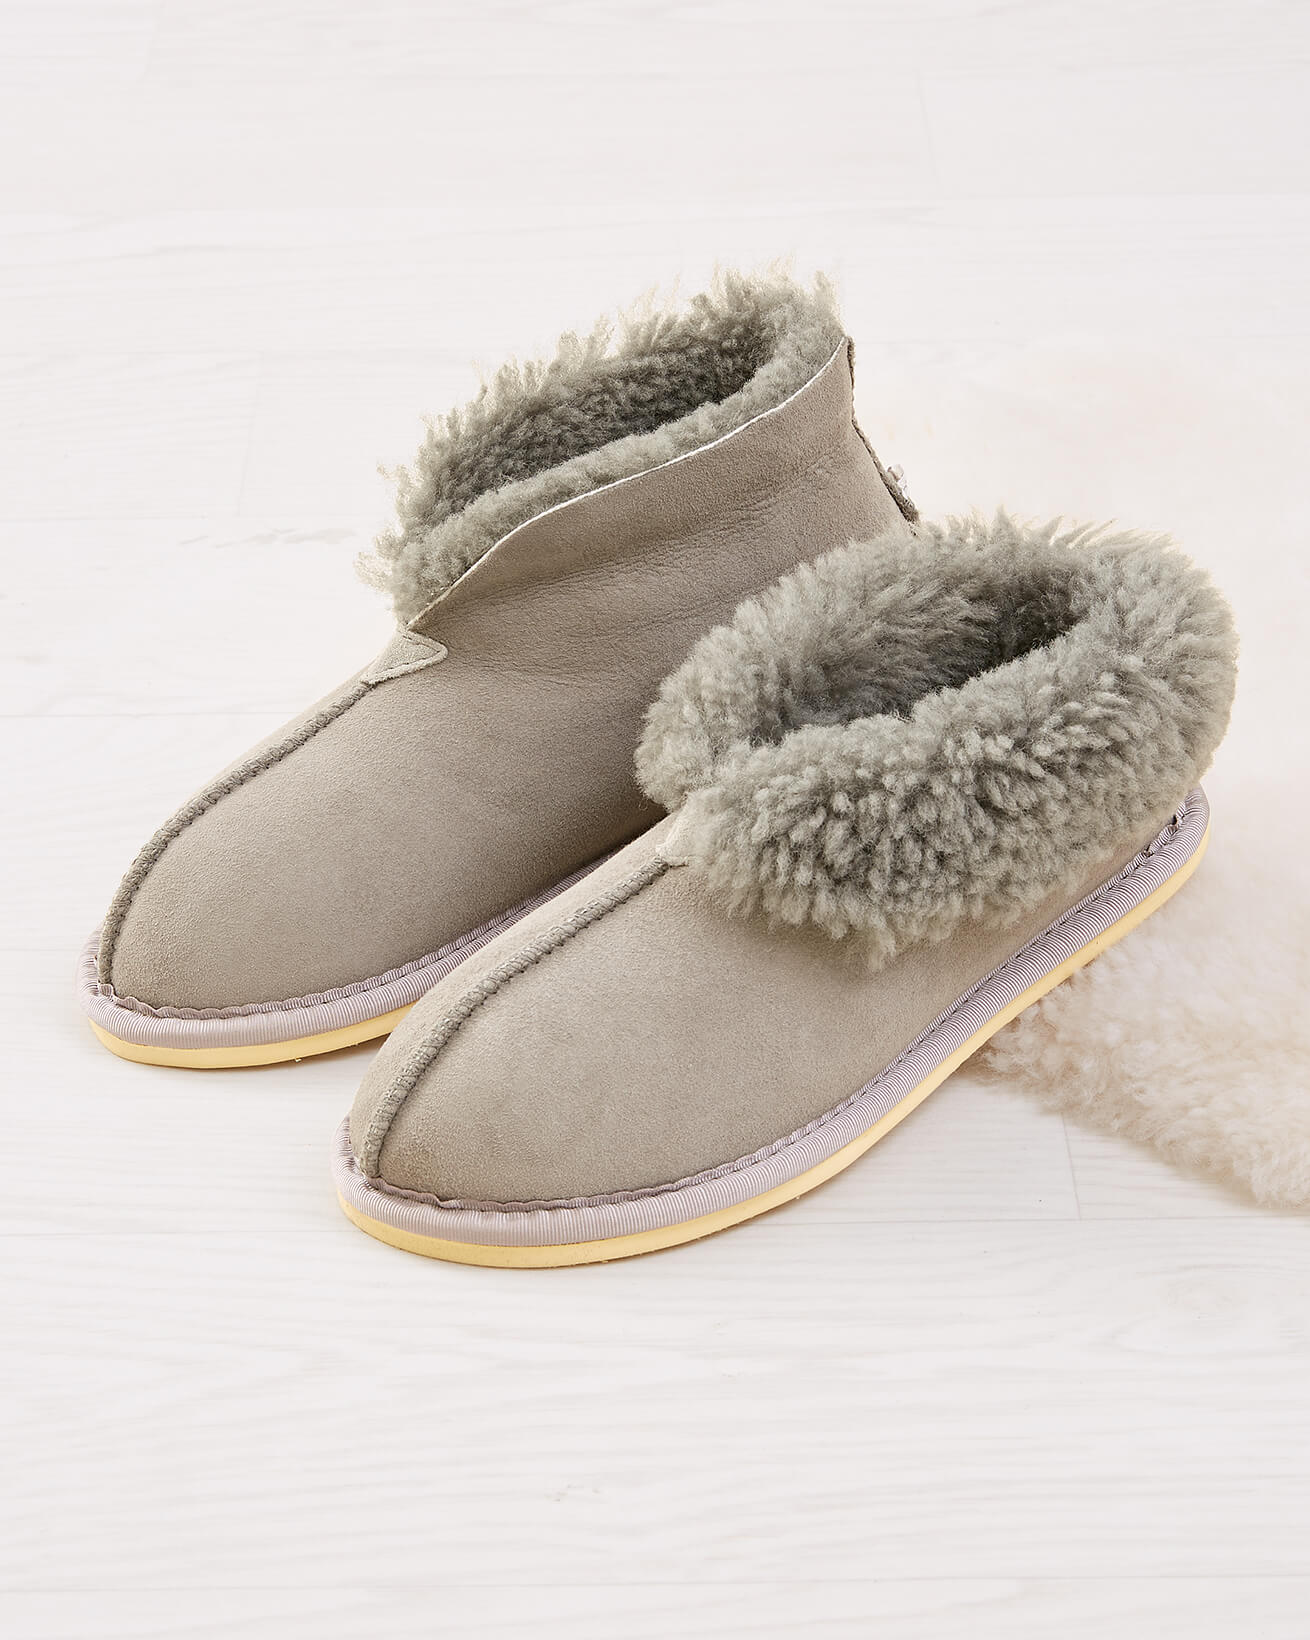 Ladies Shearling Bootee Slippers